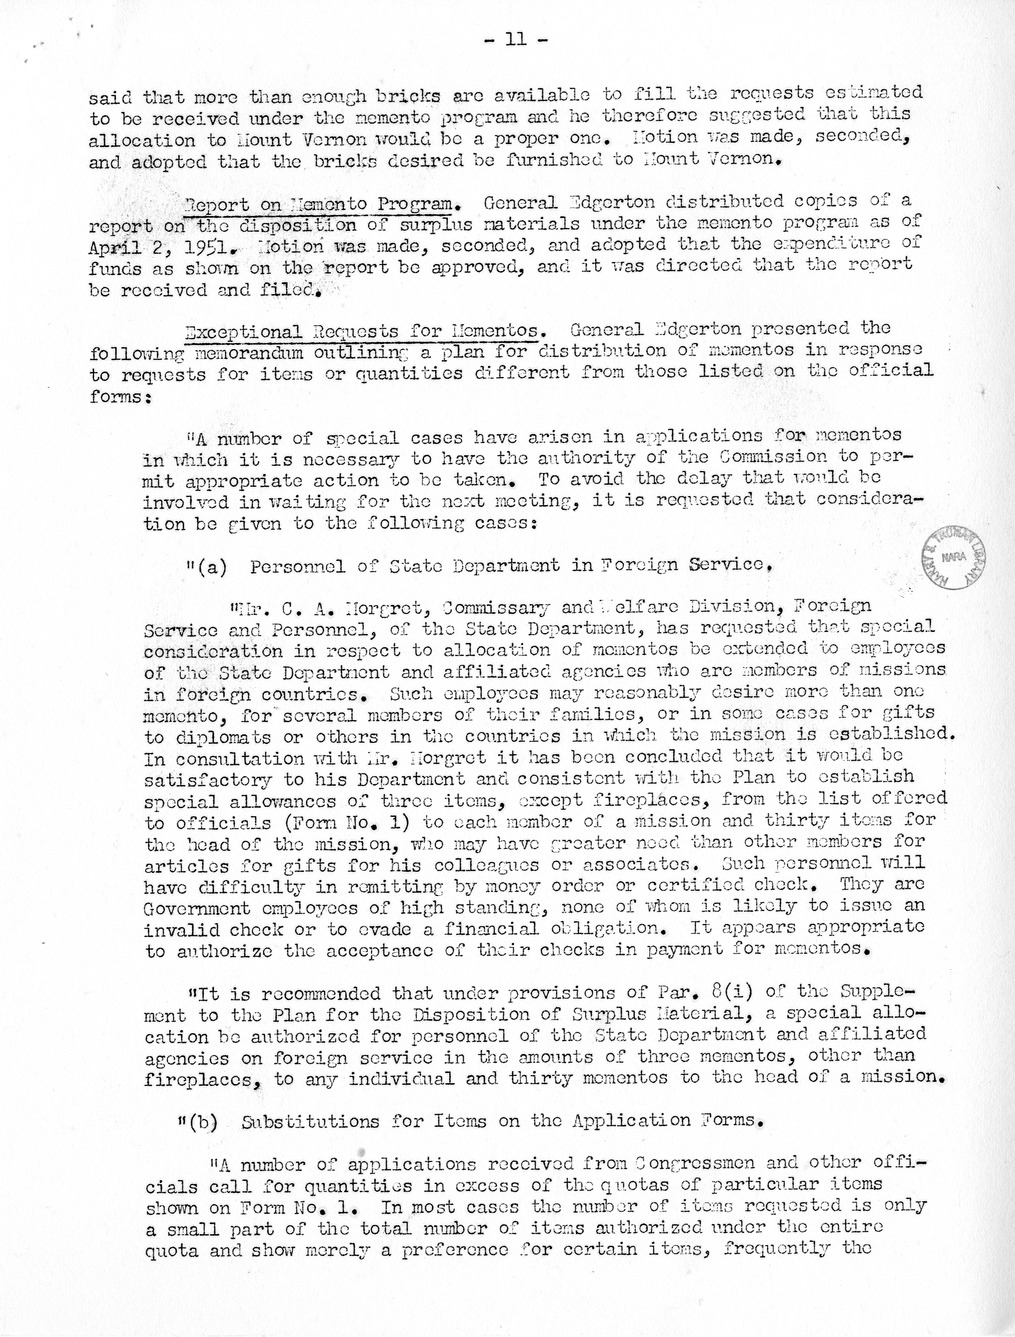 Minutes of the Fortieth Meeting of the Commission on Renovation of the Executive Mansion